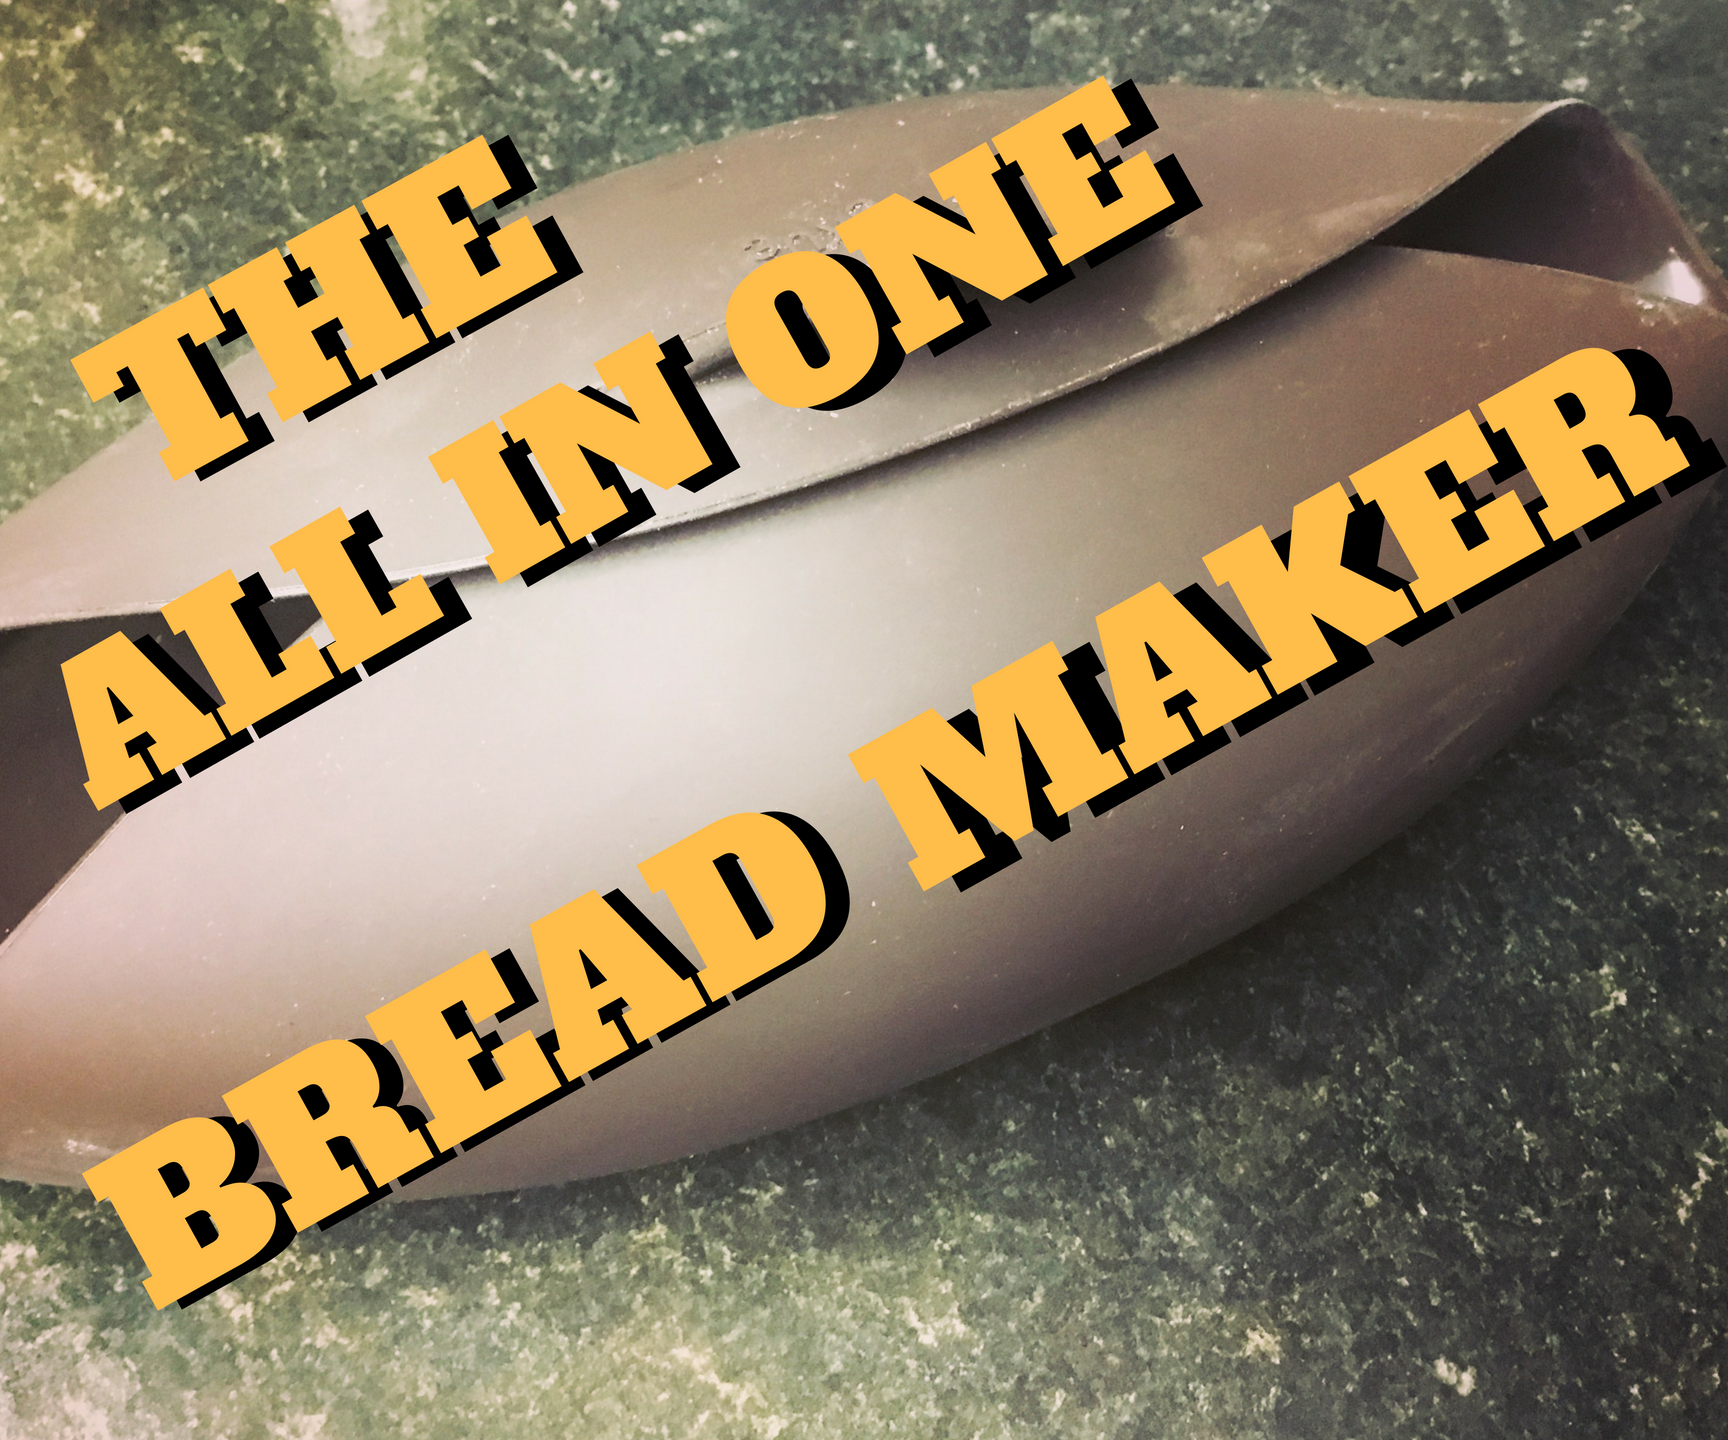 All-in-one Bread Maker